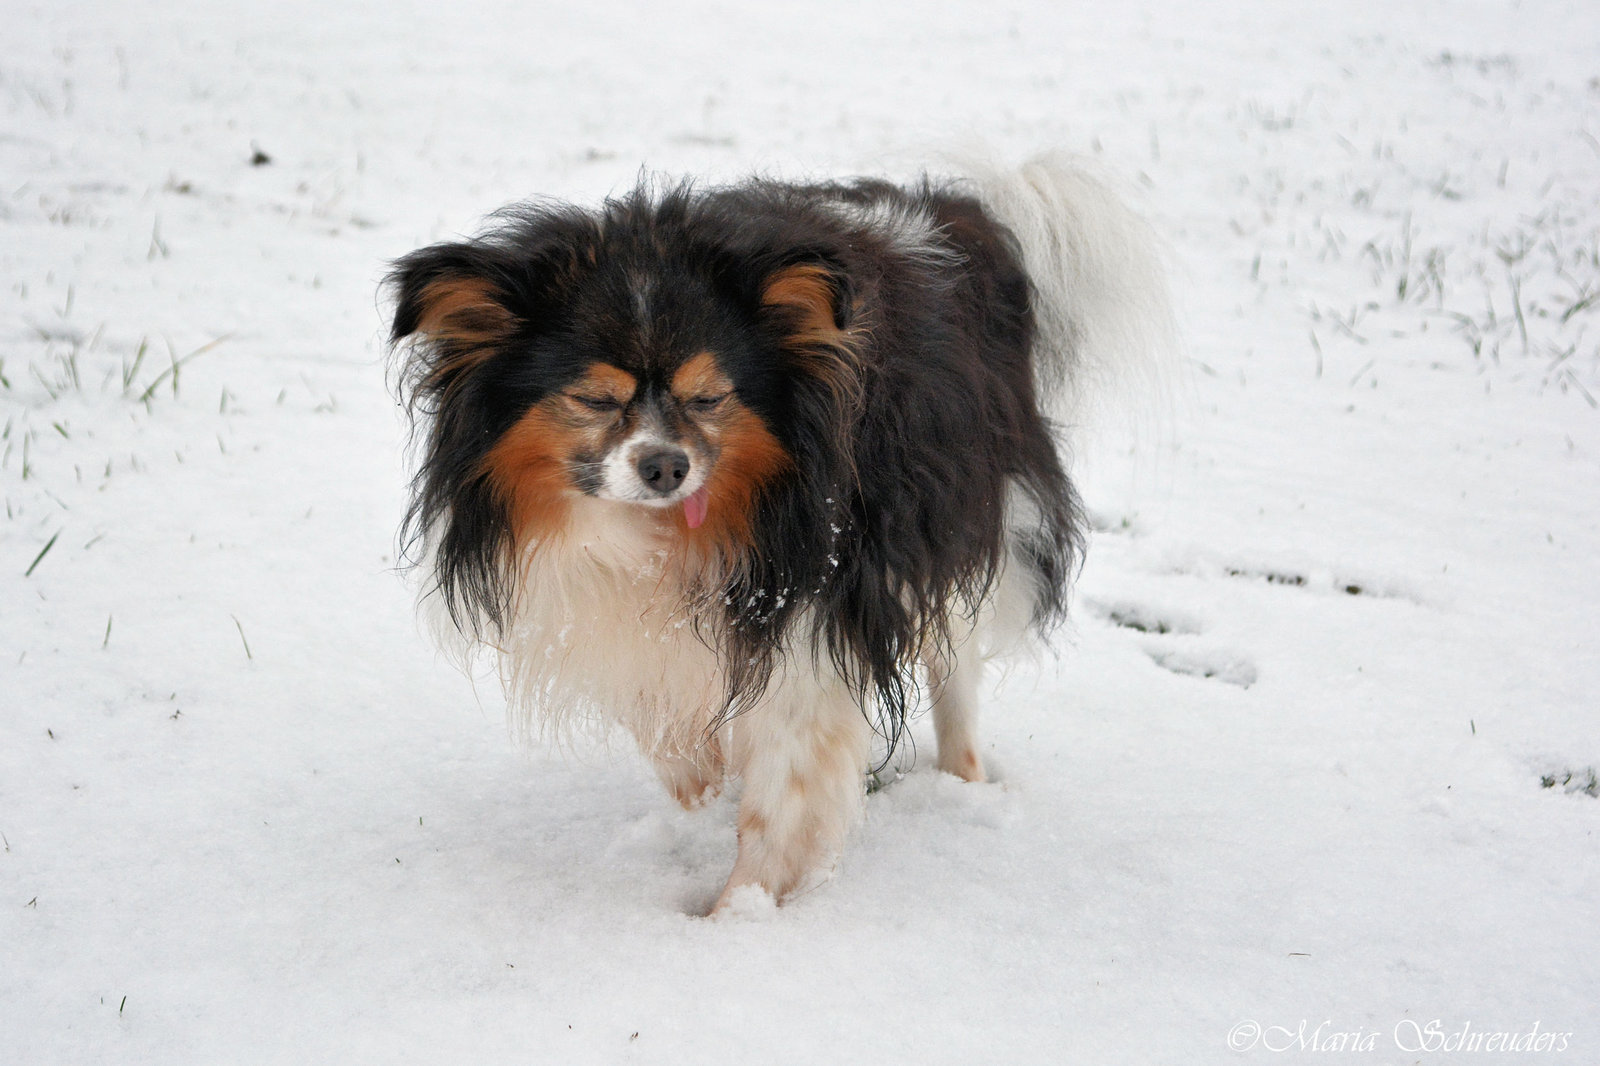 lucky_in_the_snow_2_by_maria_schreuders-daymvzw.jpg